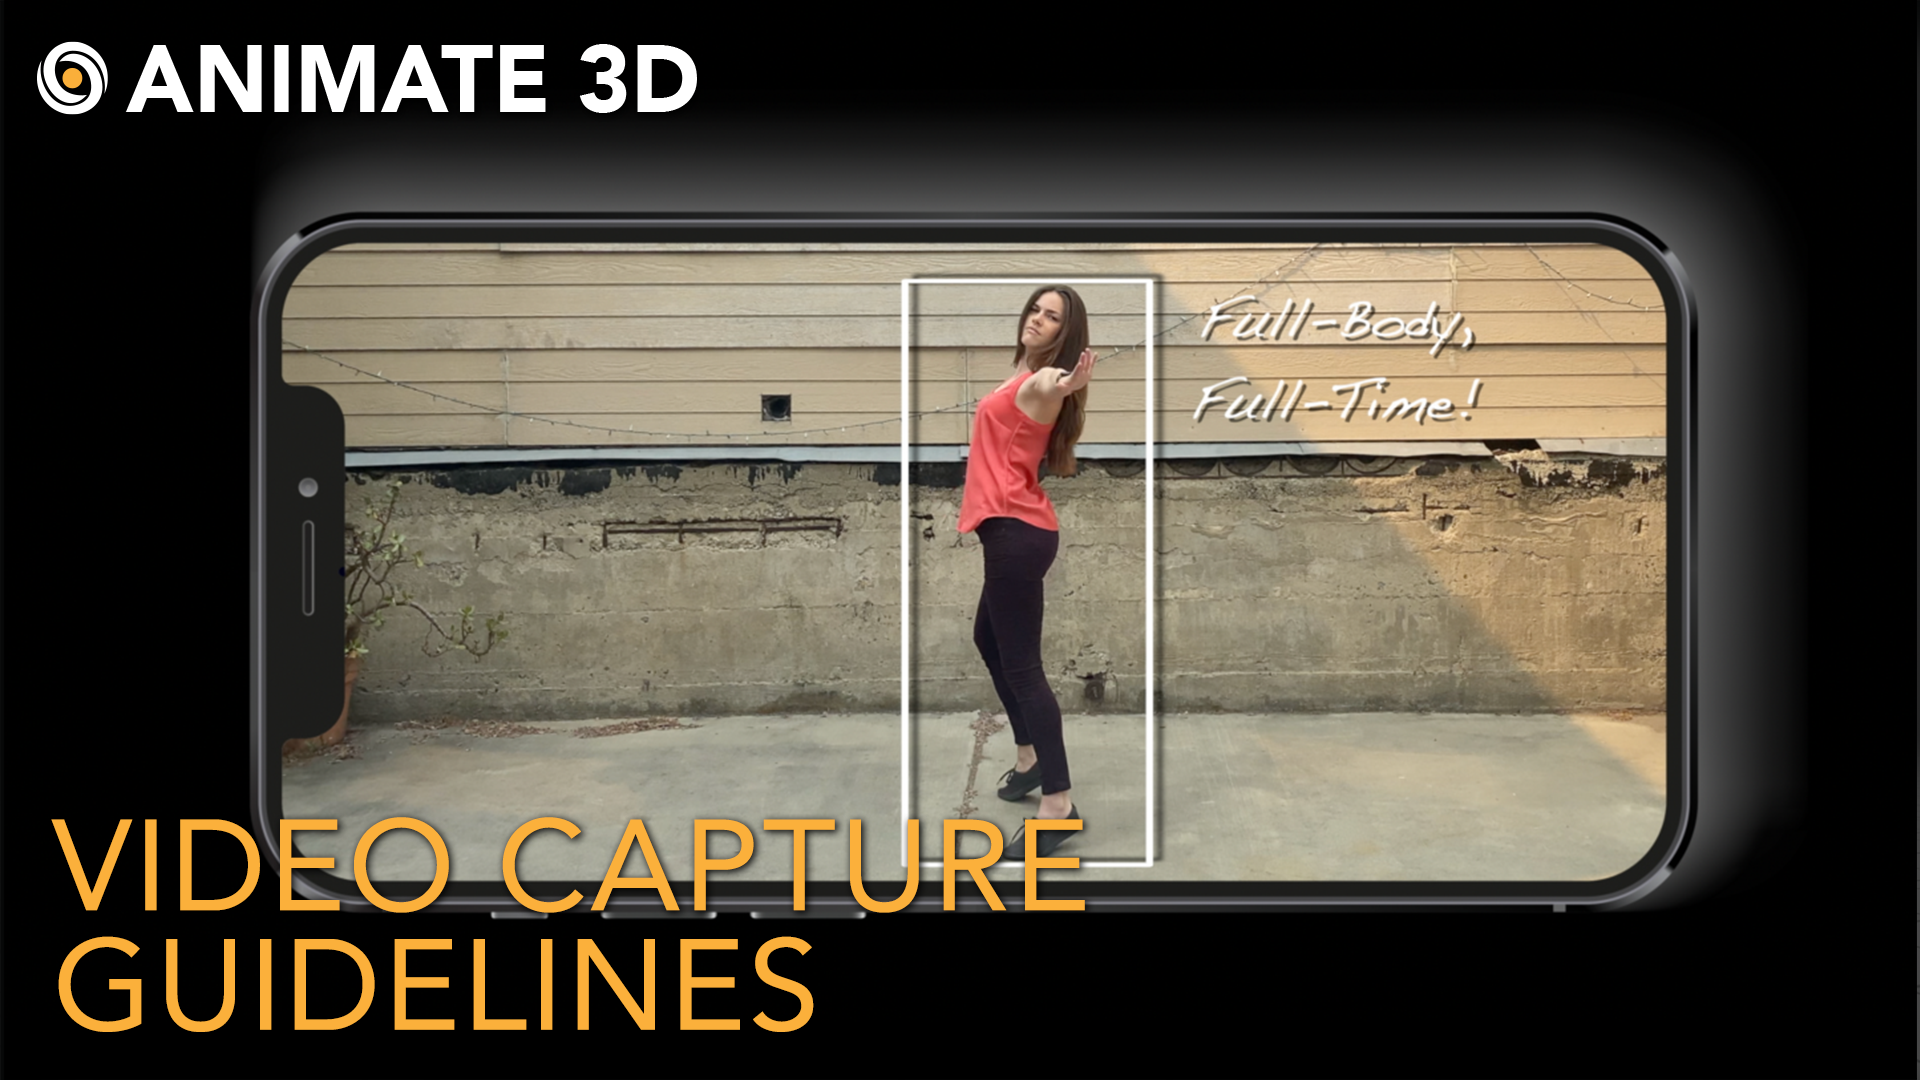 Animate 3D Video Capture Guidelines - Make Your Best Animation!